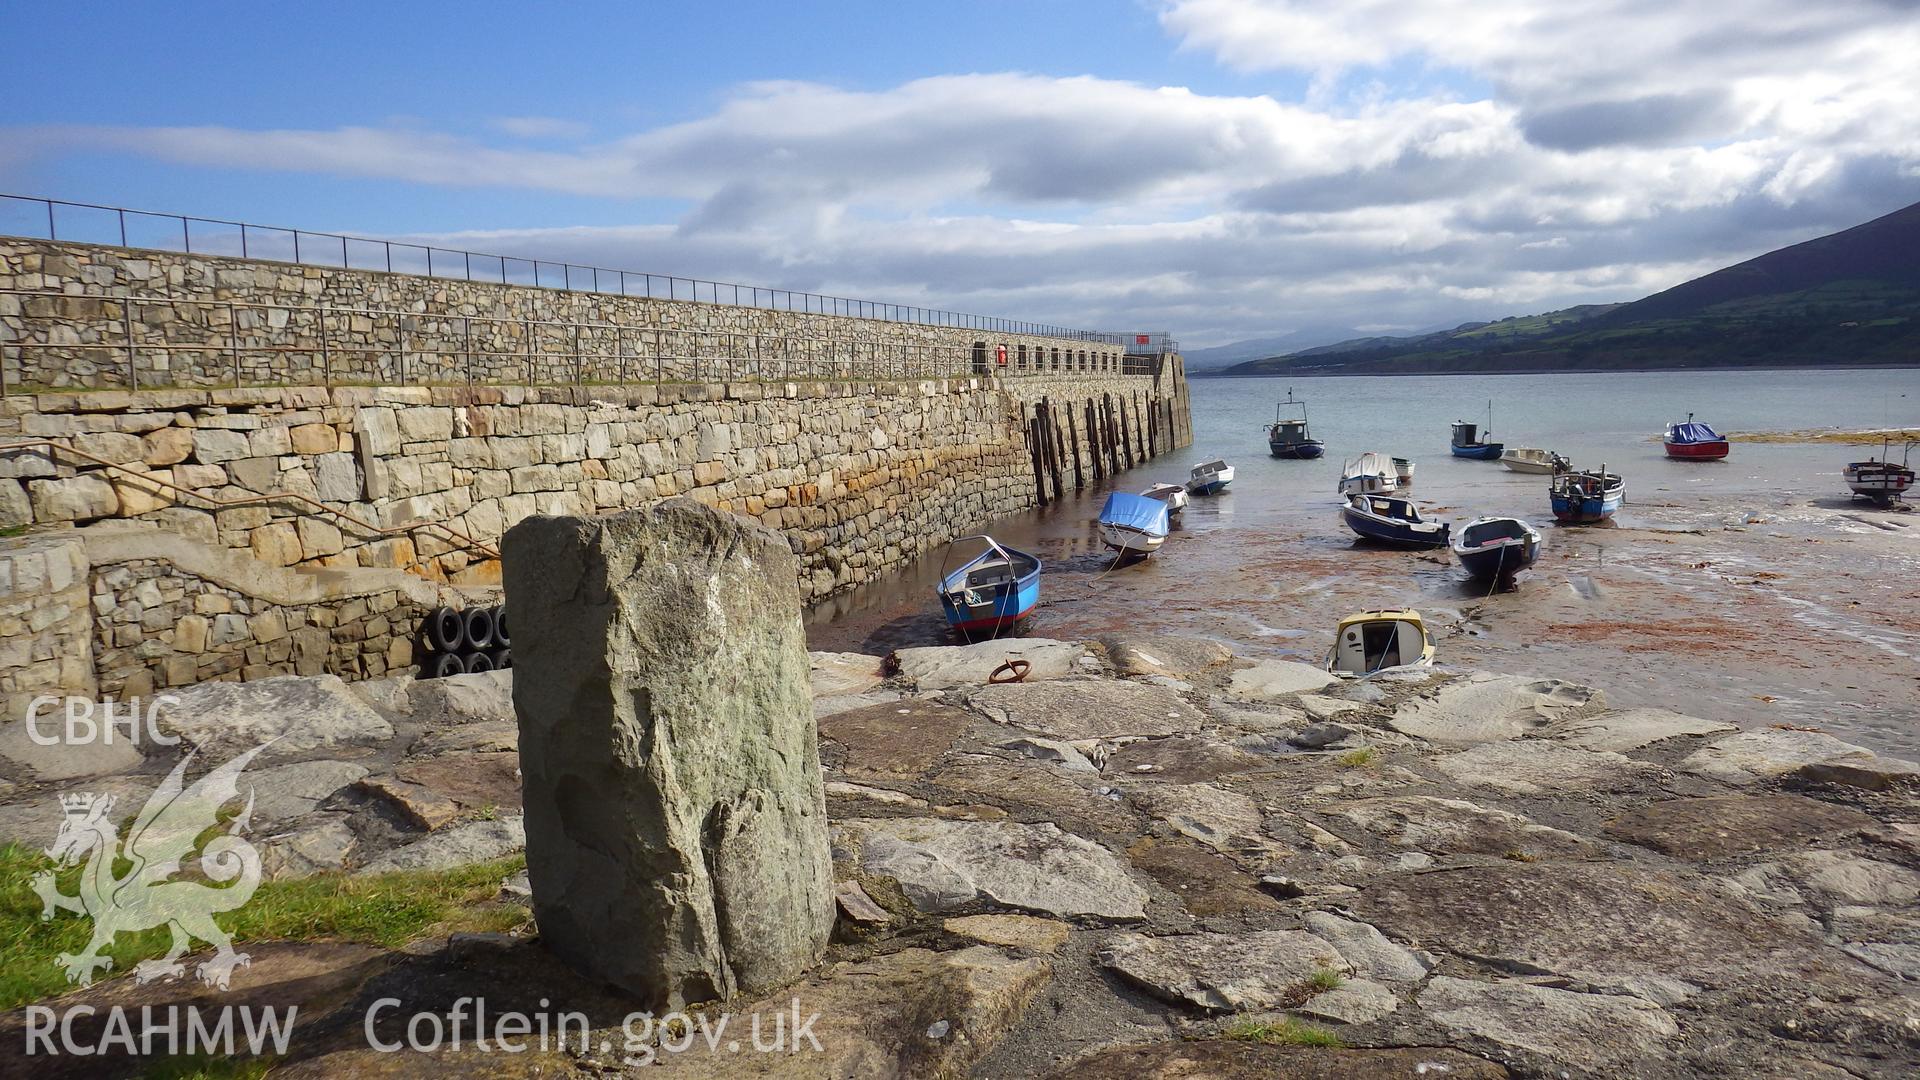 Inner wall of the harbour breakwater with large stone mooring bollard at entrance to small dock in foreground